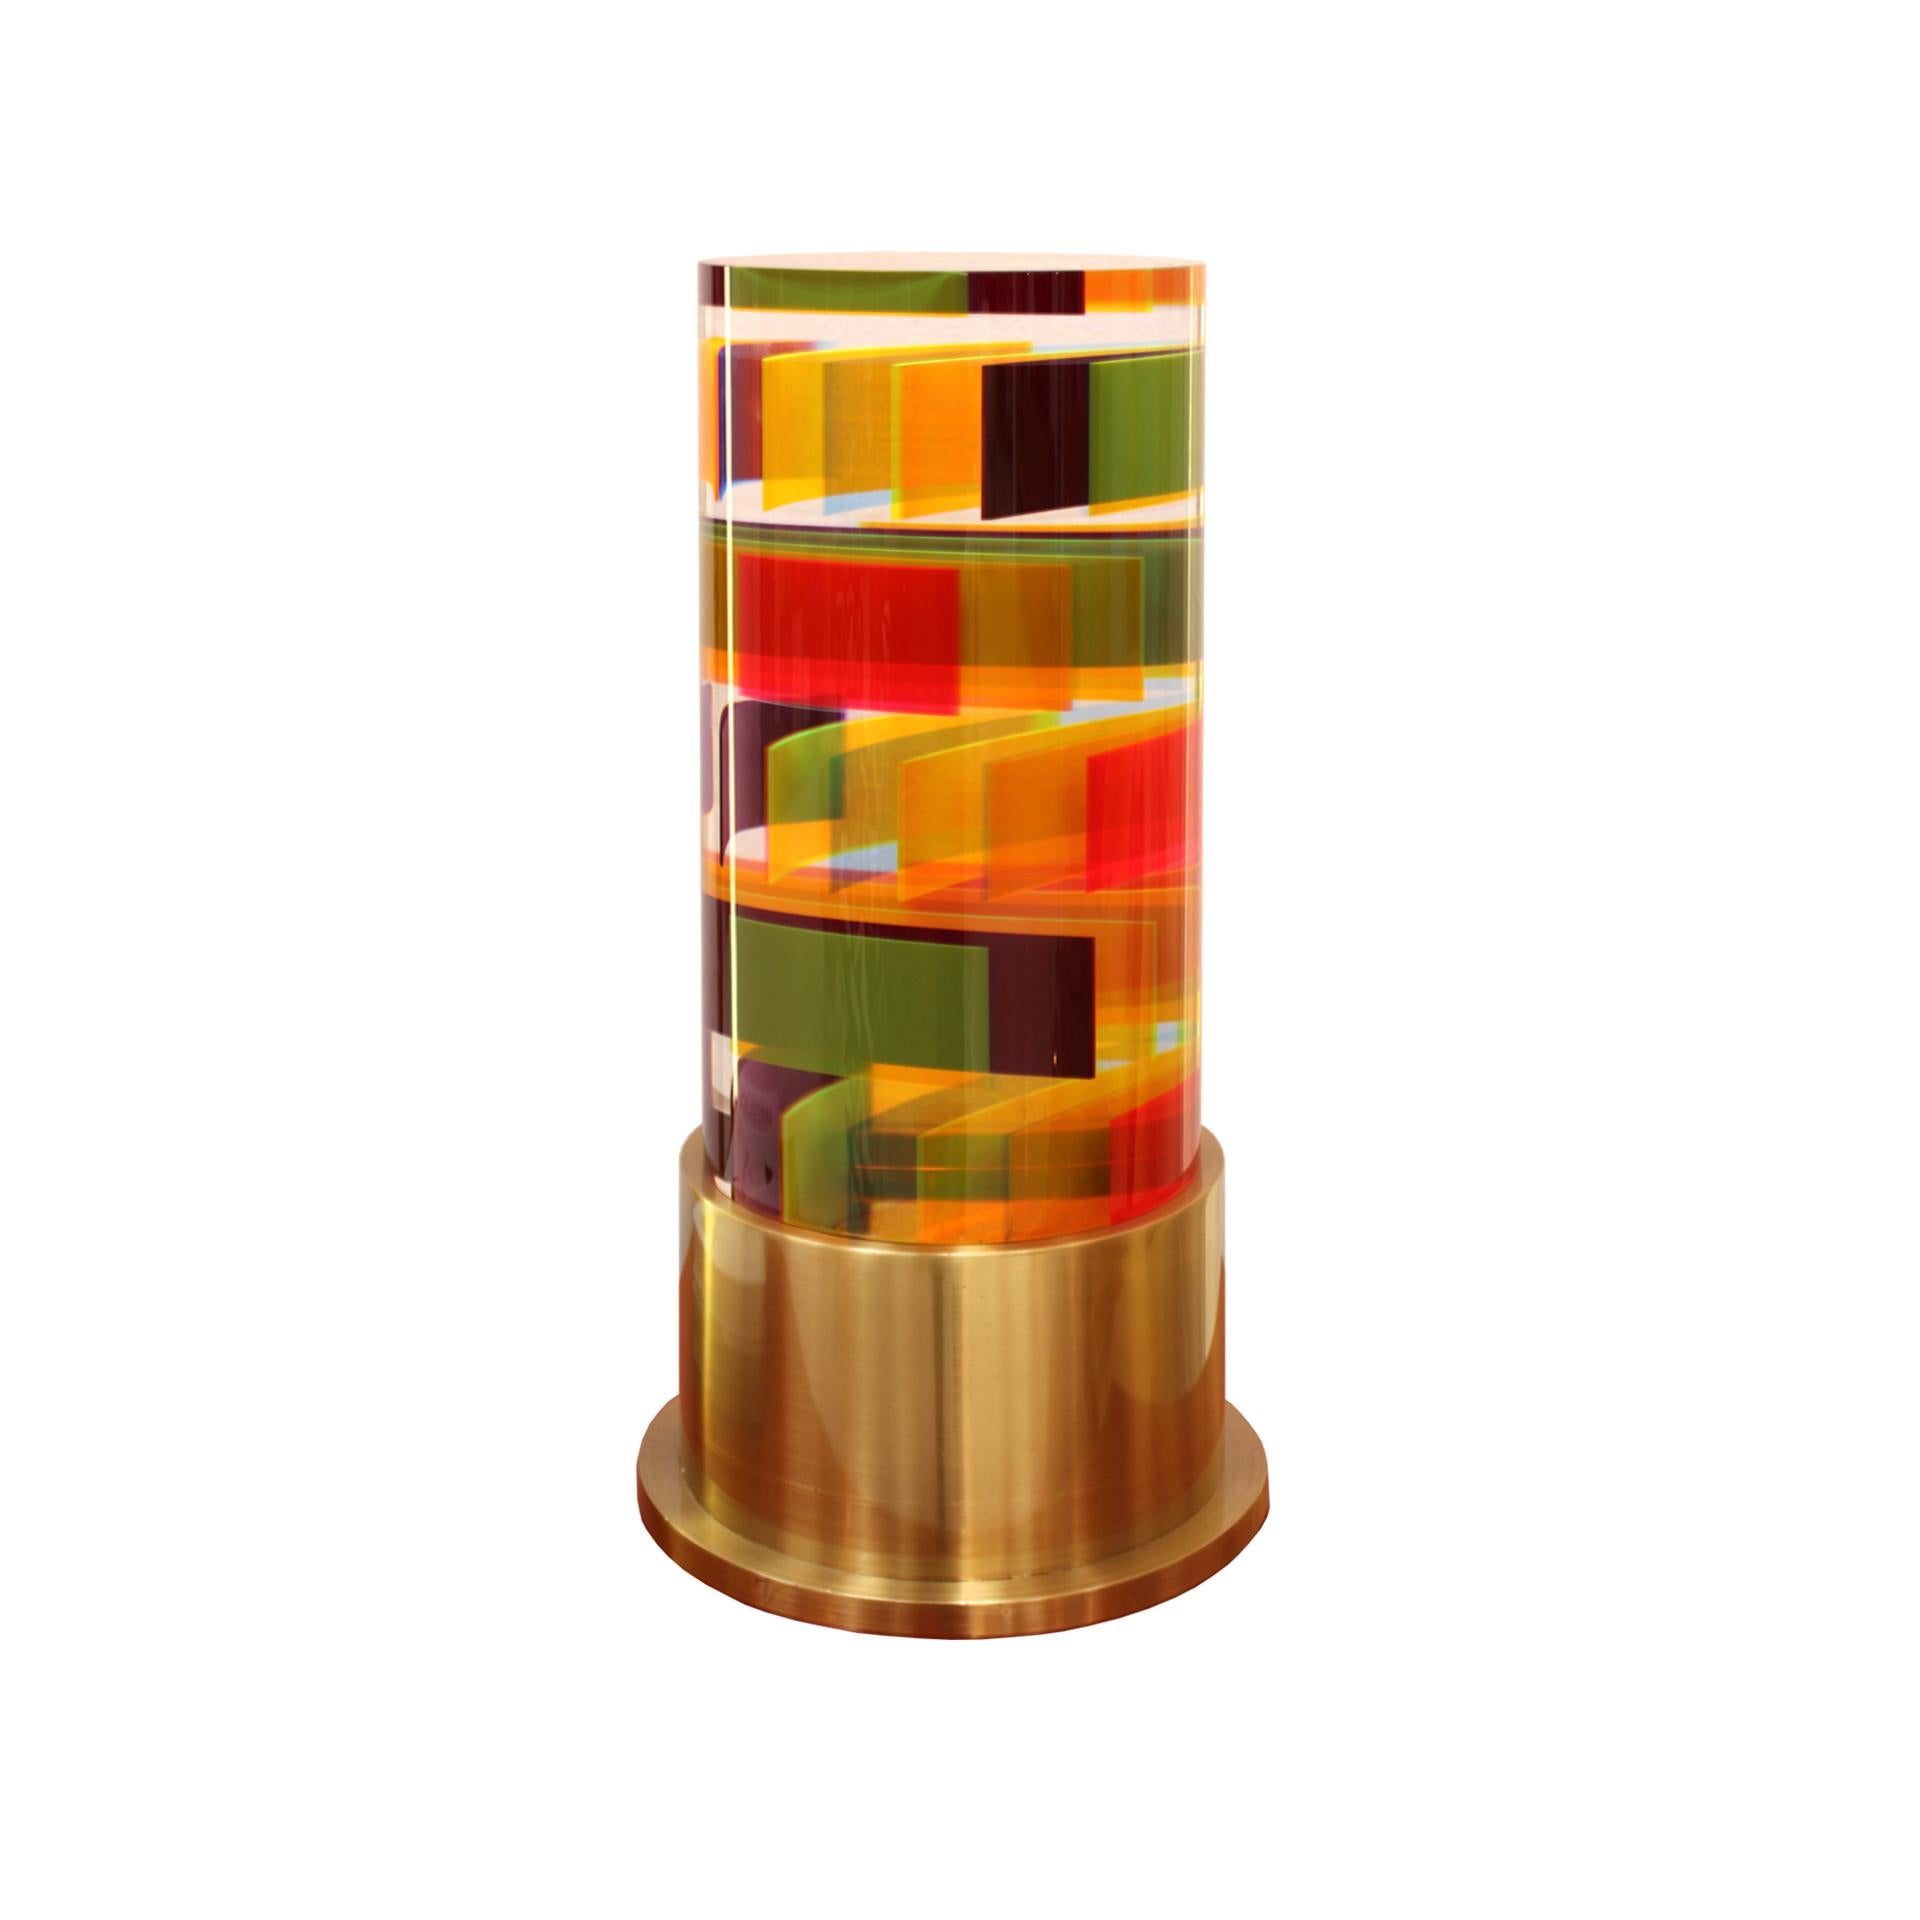 Italian table lamp mod DNA designed by Superego Studio. Made of diferent colored plexiglass pieces assembled like in a 3D mosaic. Structure made of solid brass. Designed by Studio Superego.

Our main target is customer satisfaction, so we include